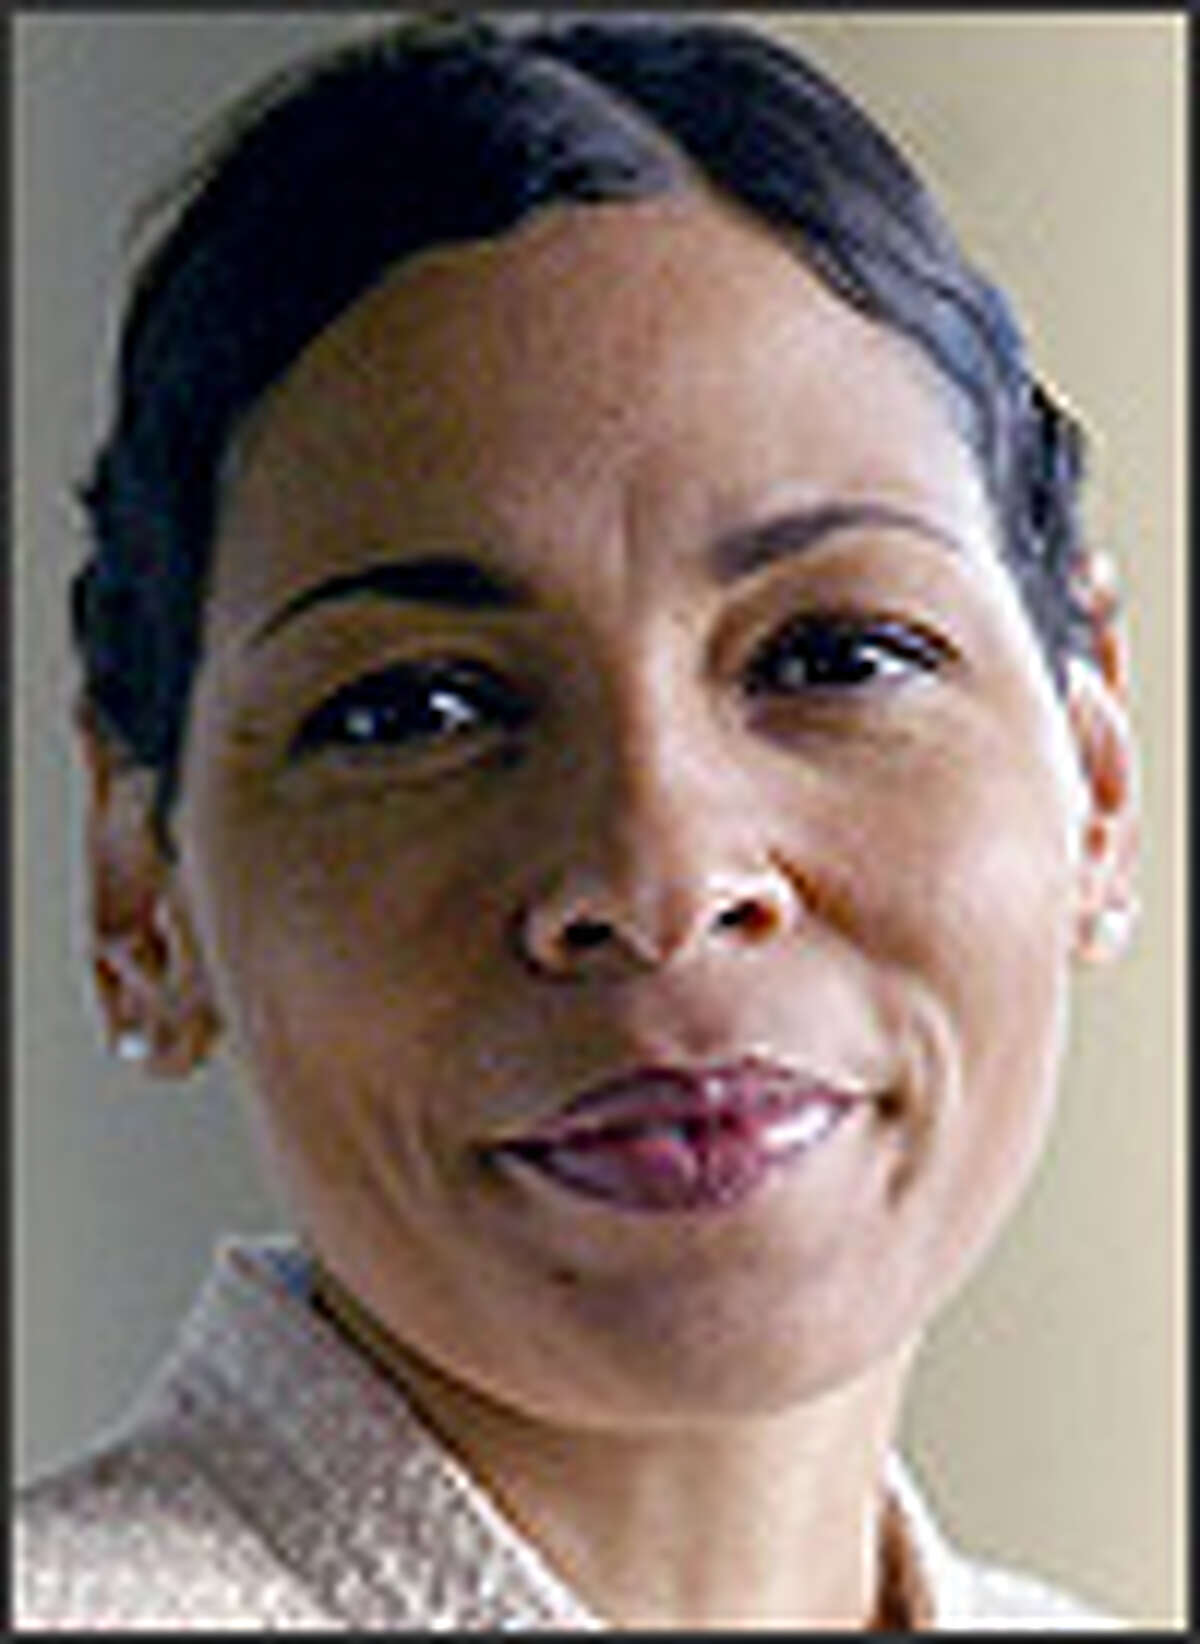 Caprice Hollins' time at the Office of Equity, Race and Learning Support was known less for progress than missteps, including her decision to send students to a "white privilege" conference.